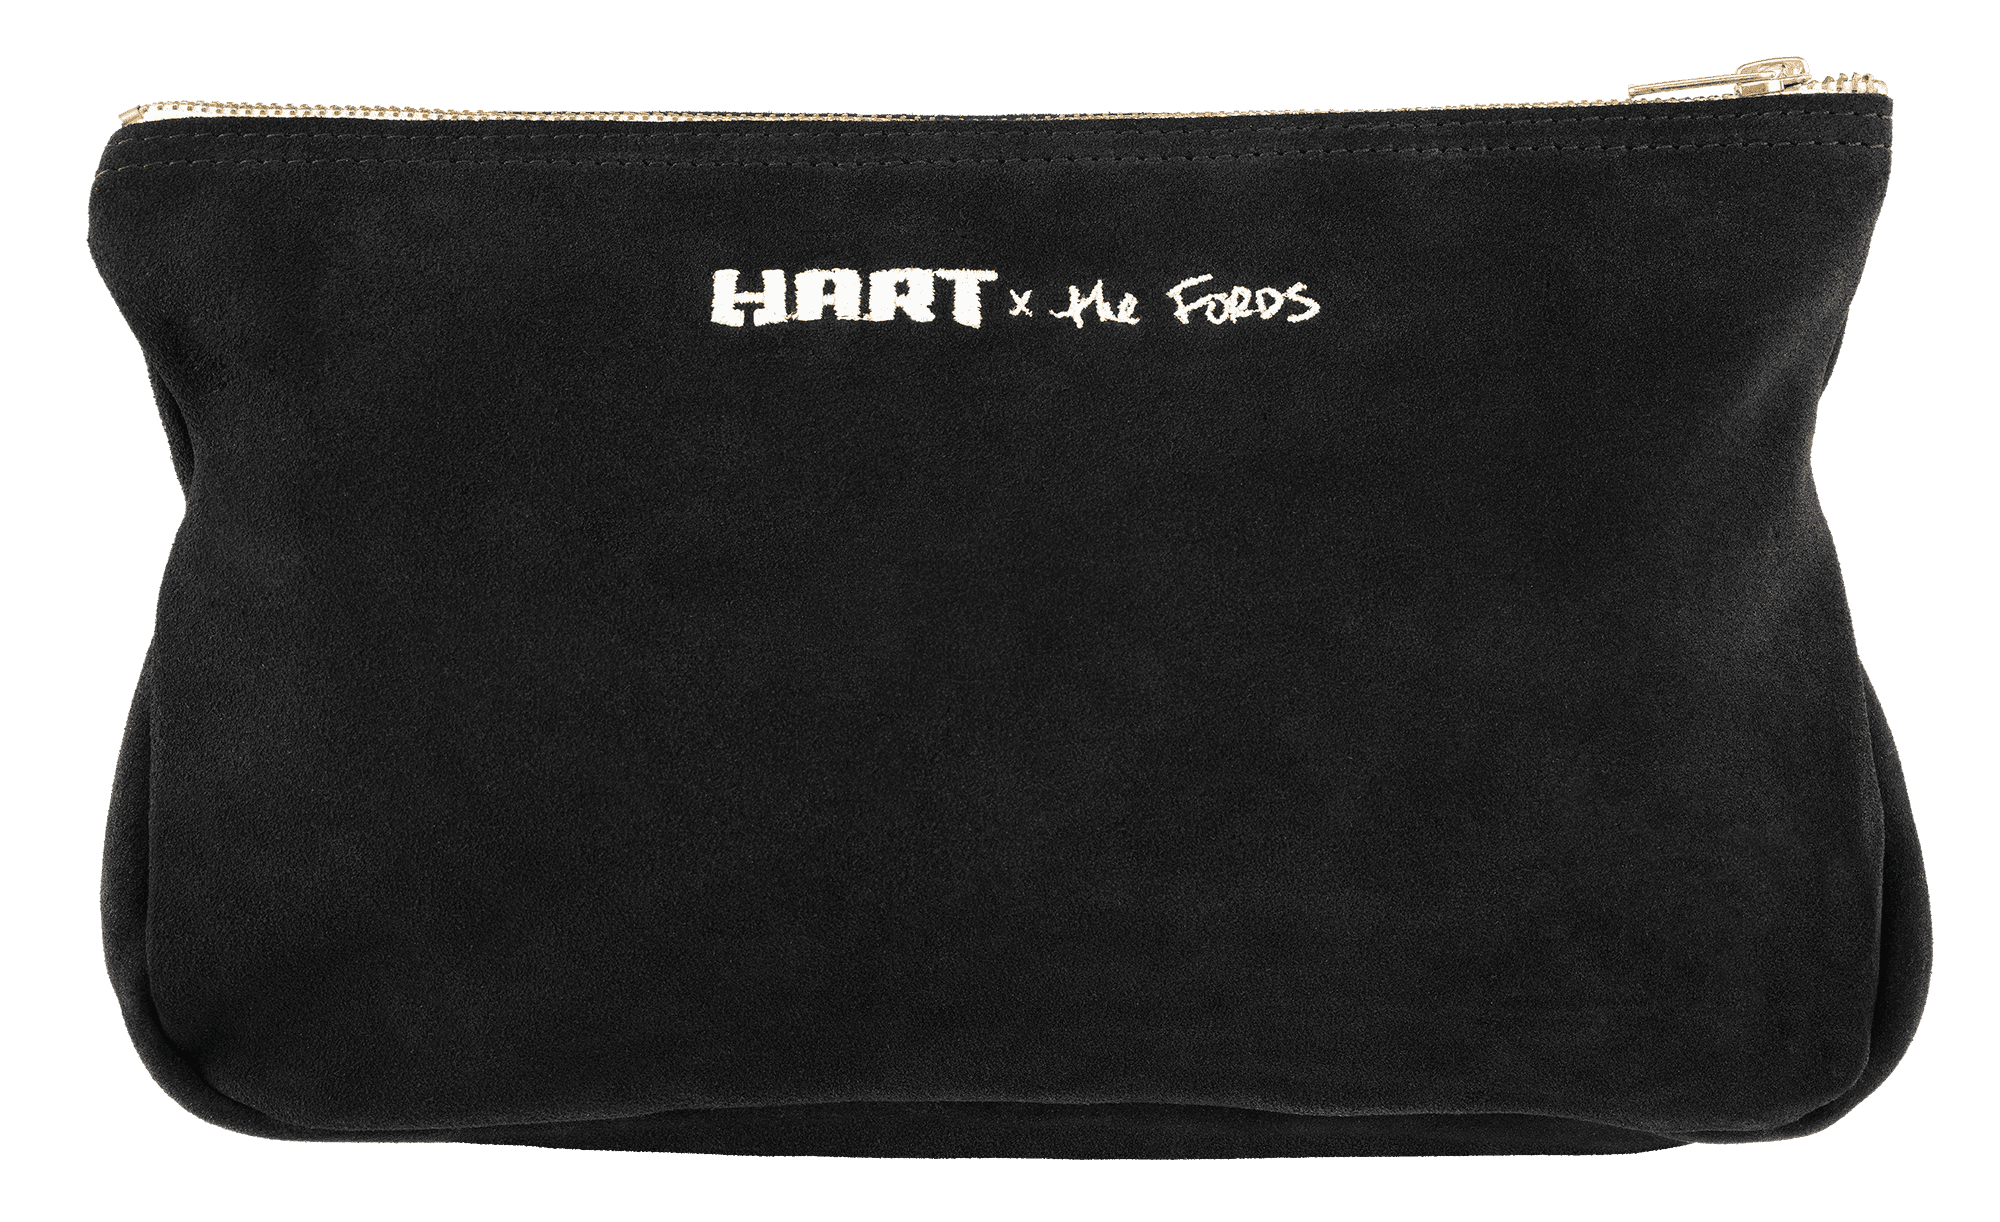 HART x the Fords Leather Tool Pouch $6.45 Free S H w/ Walmart or $35